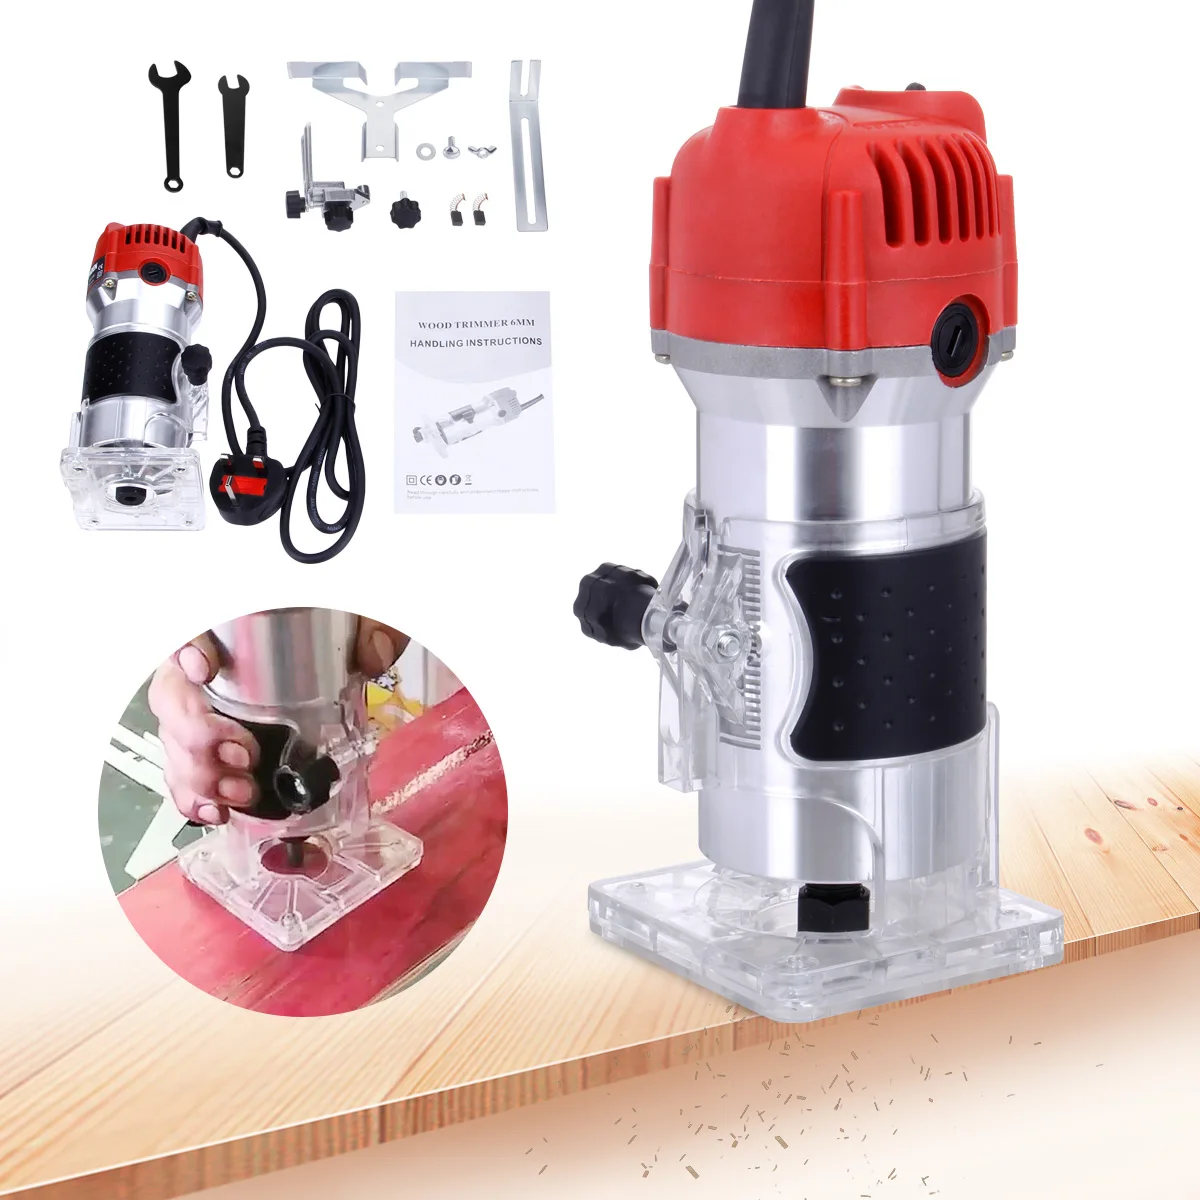 

800W 30000rpm Electric Wood Router Woodworking Trimmer Wood Milling Engraving Slotting Trimming Machine Hand Carving Router